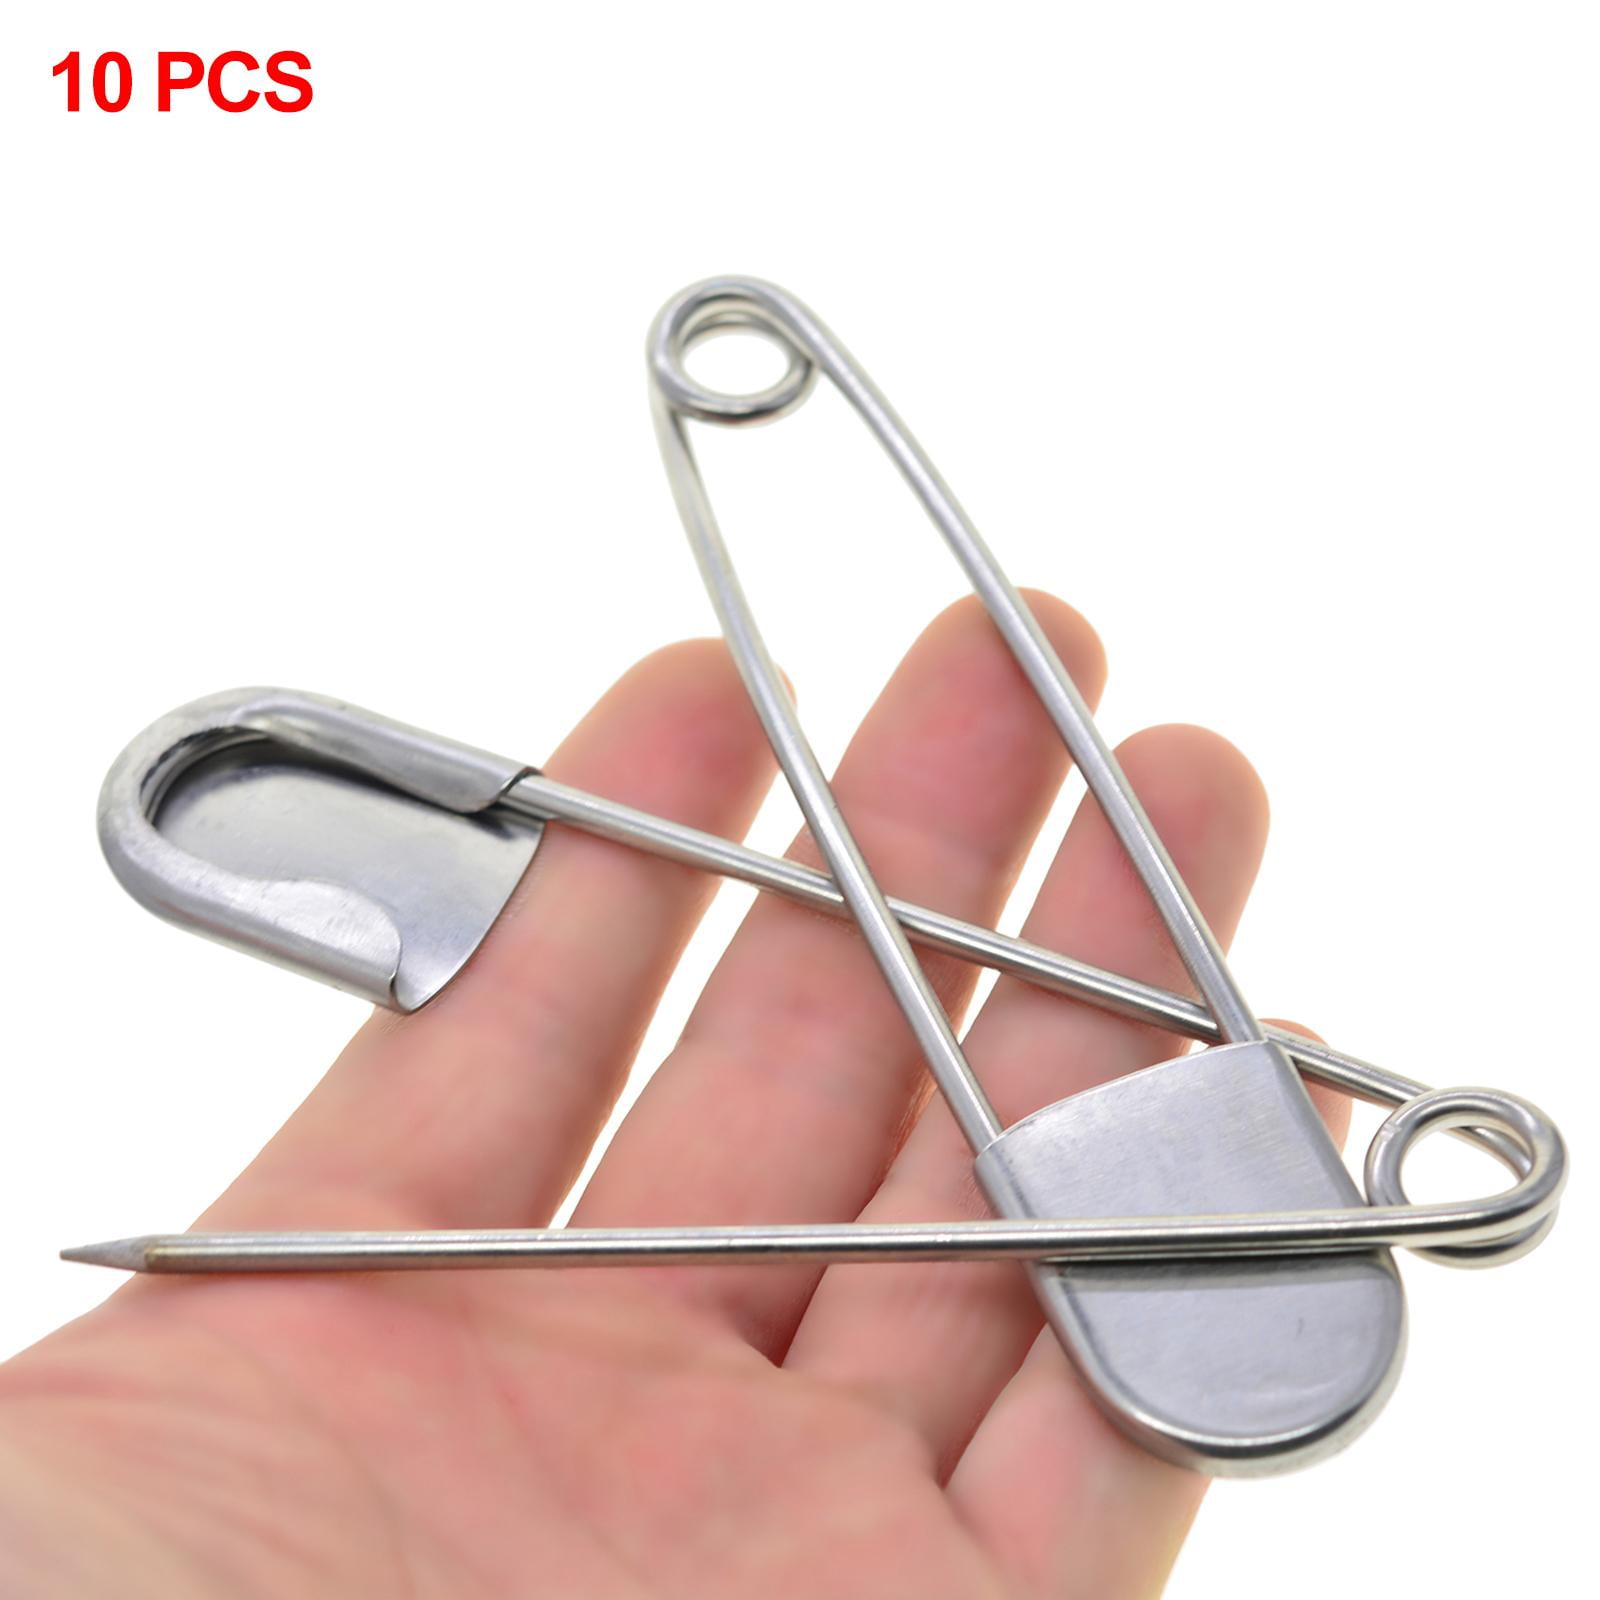 Safety Pins 20 pack 10 small & 10 large 